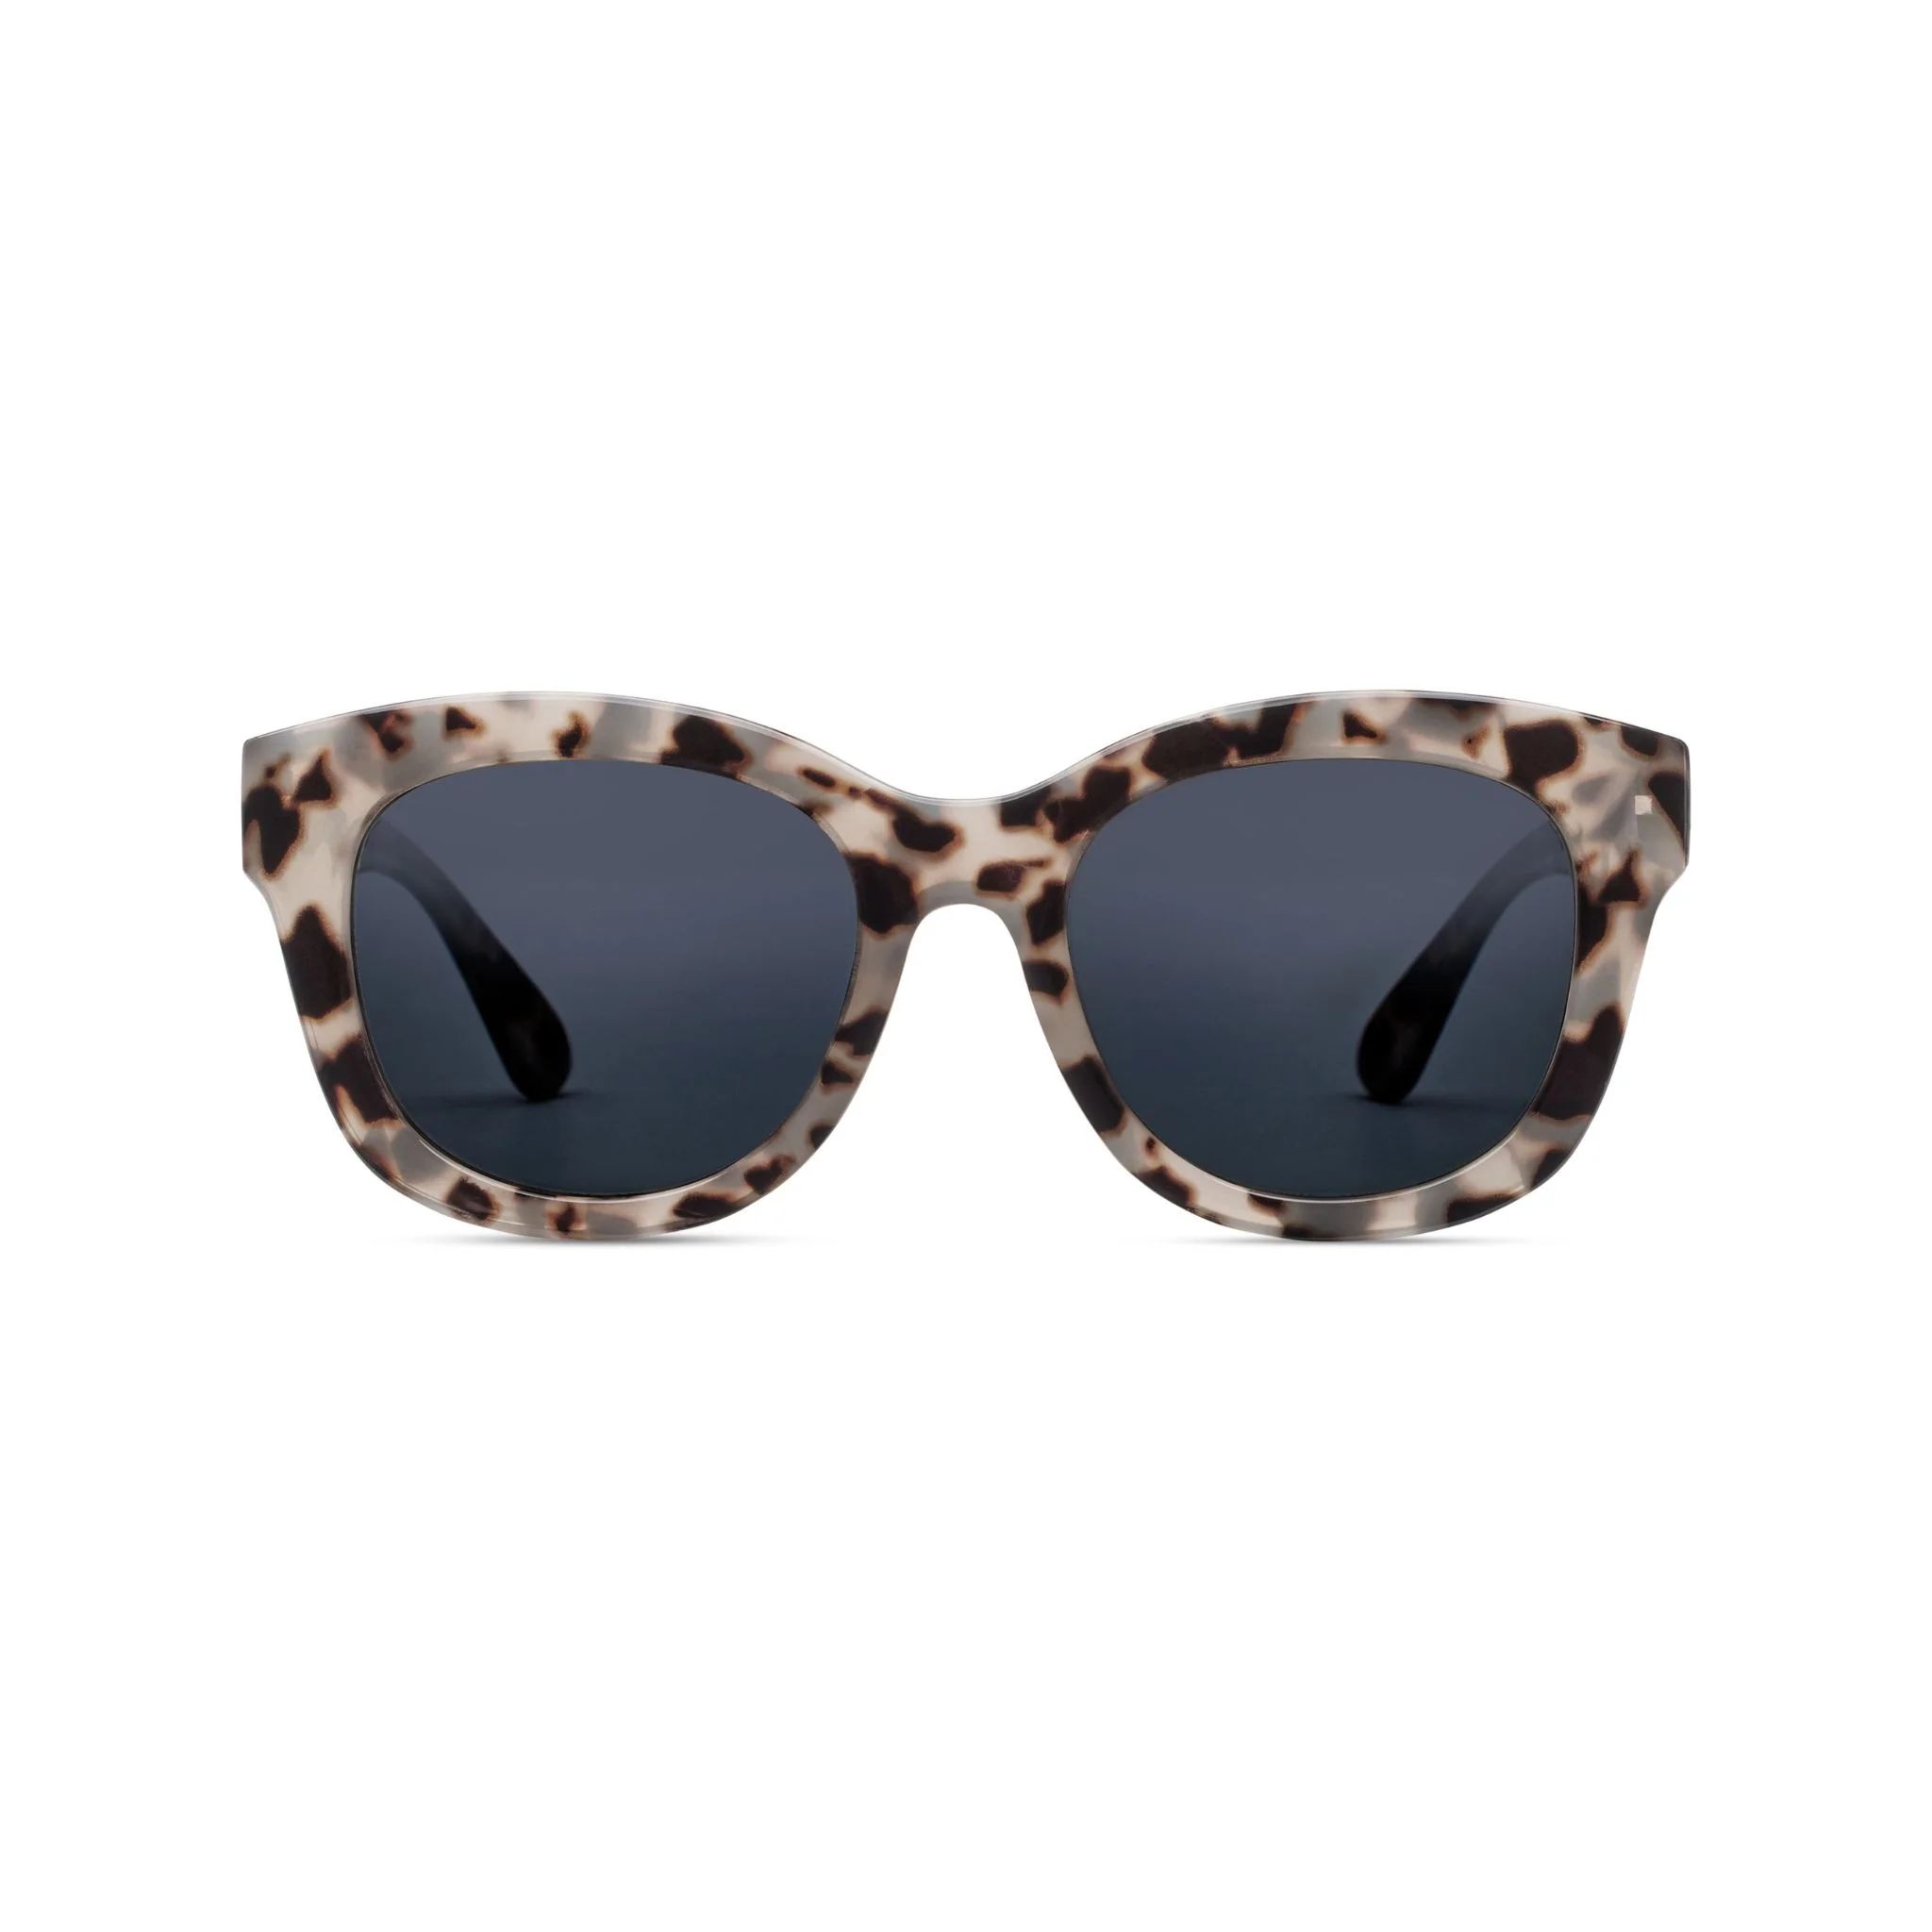 Center Stage | Sunglasses from Peepers - Peepers by PeeperSpecs | Peepers